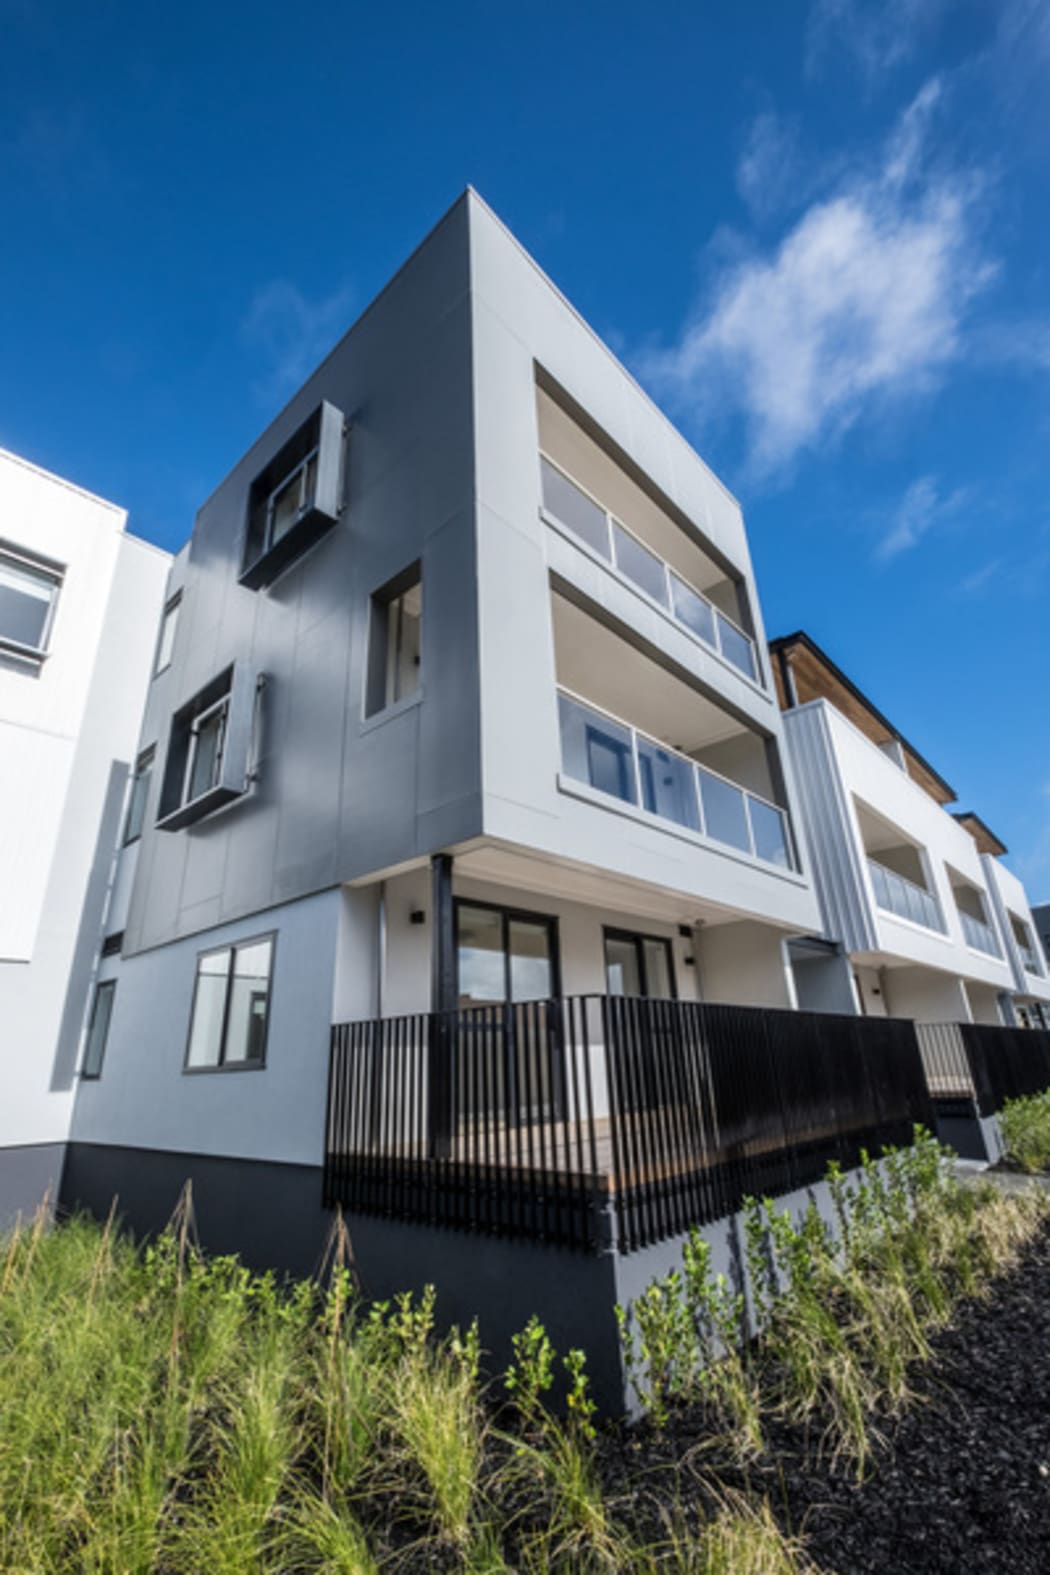 The exterior of the new development in Three Kings, Auckland which, out of the 100 apartments, 10 are classified as affordable.